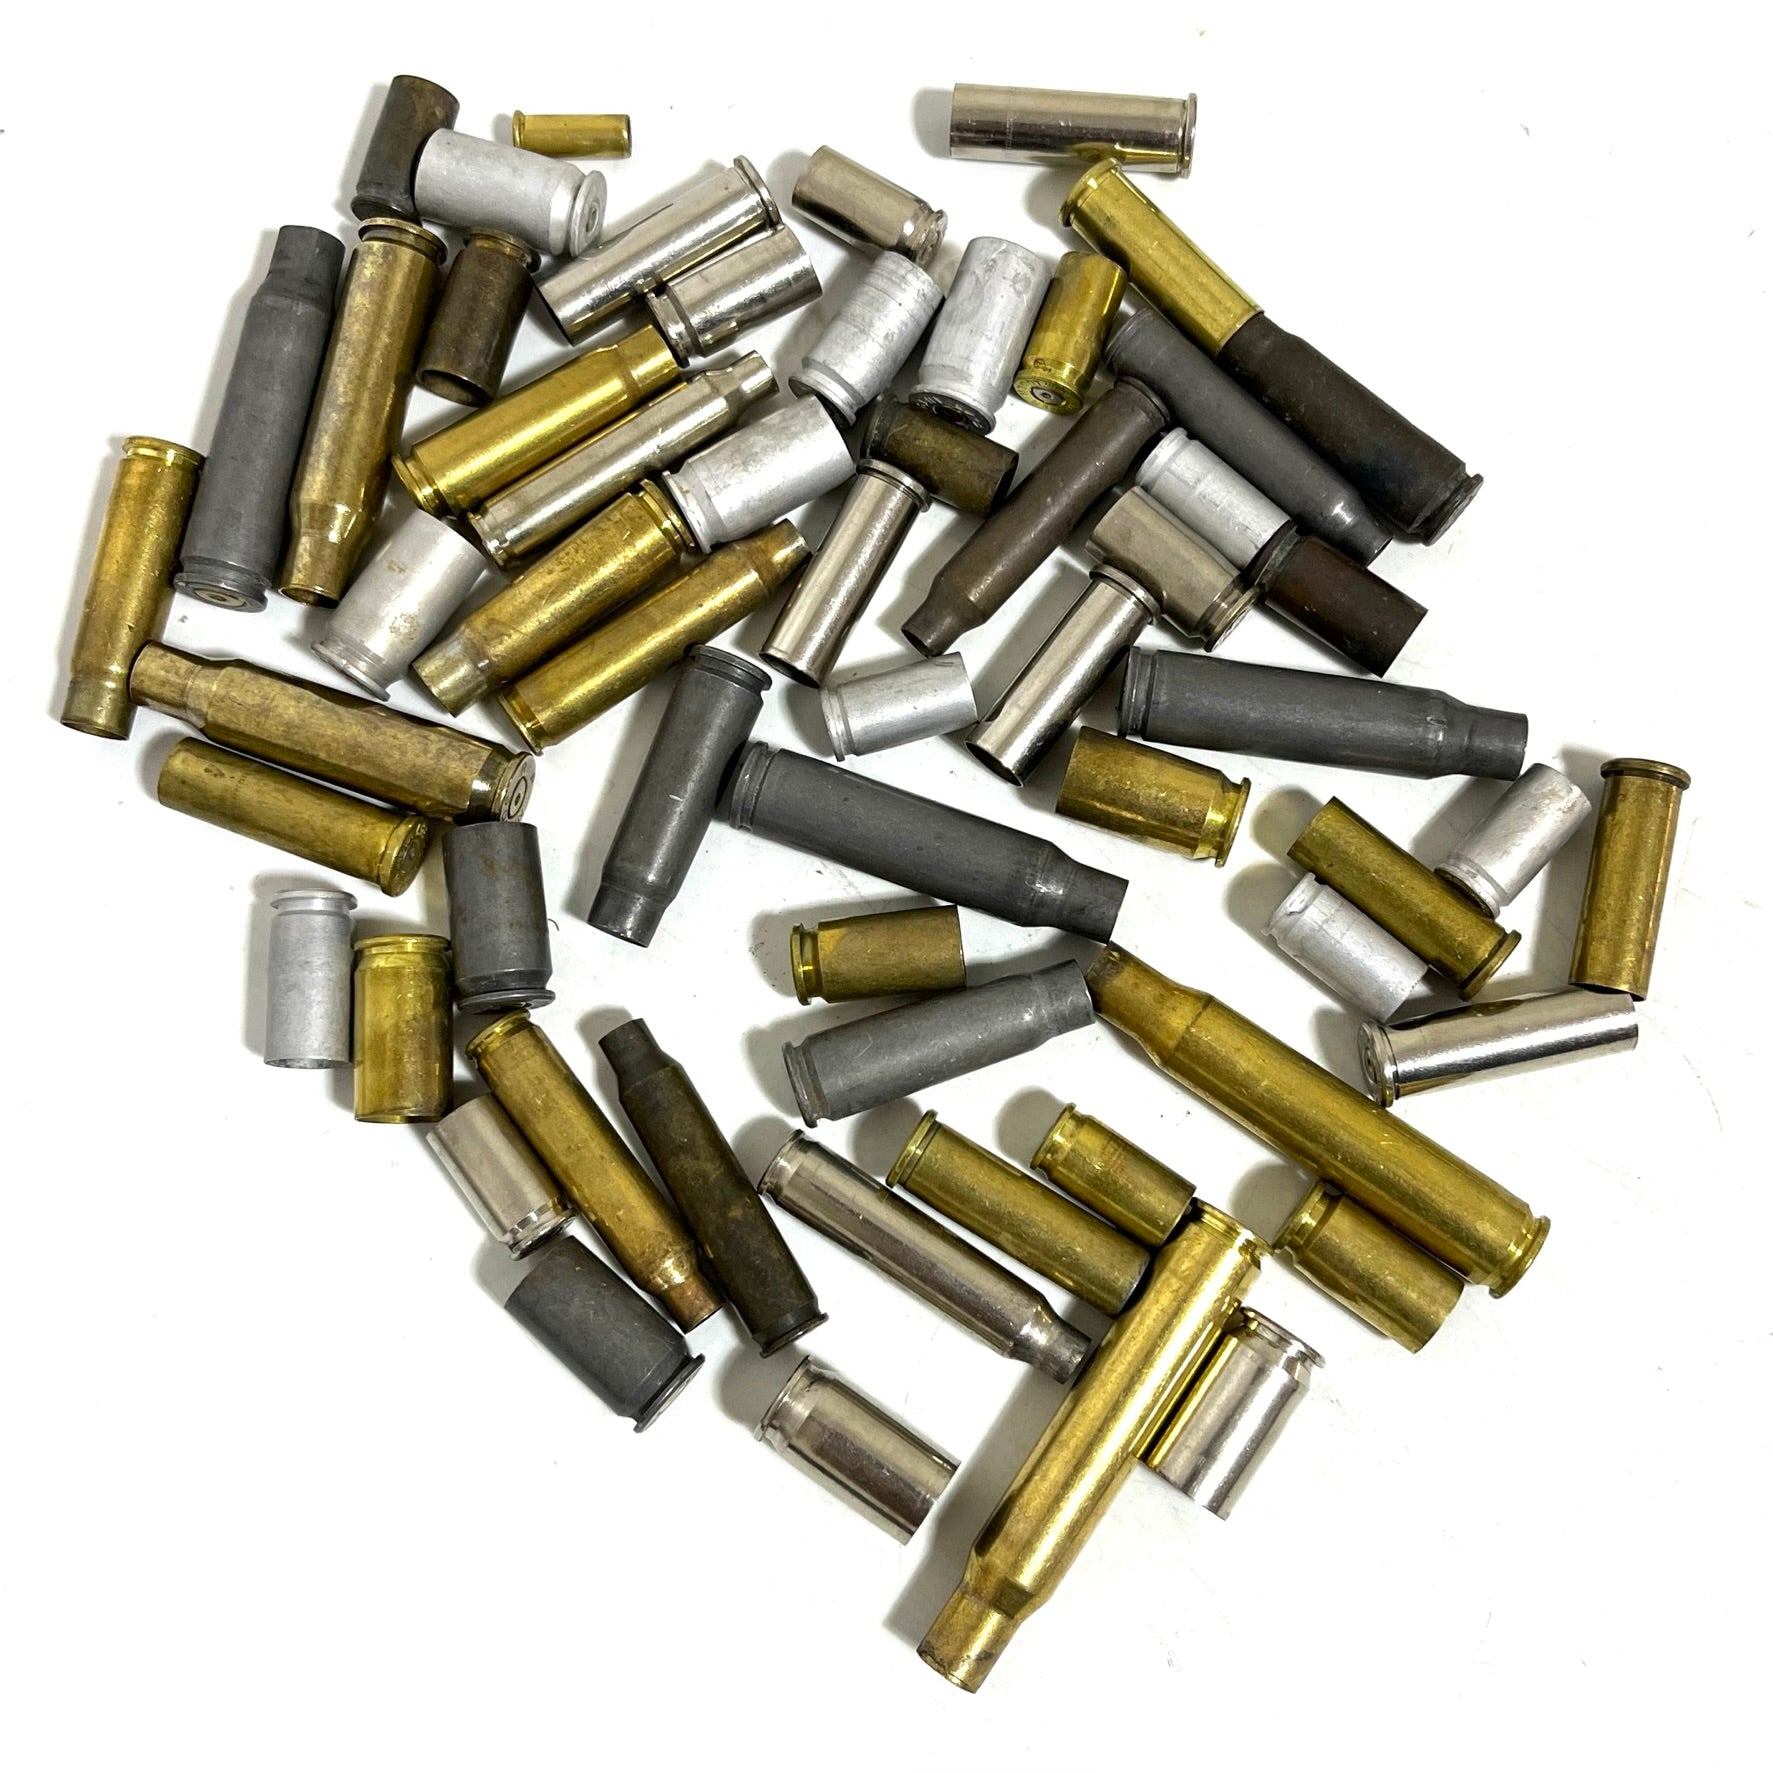 44 Mag, Spent Brass Bullet Casings, 15 pieces, Used Bullet Shells , Jewelry  Part on eBid Canada